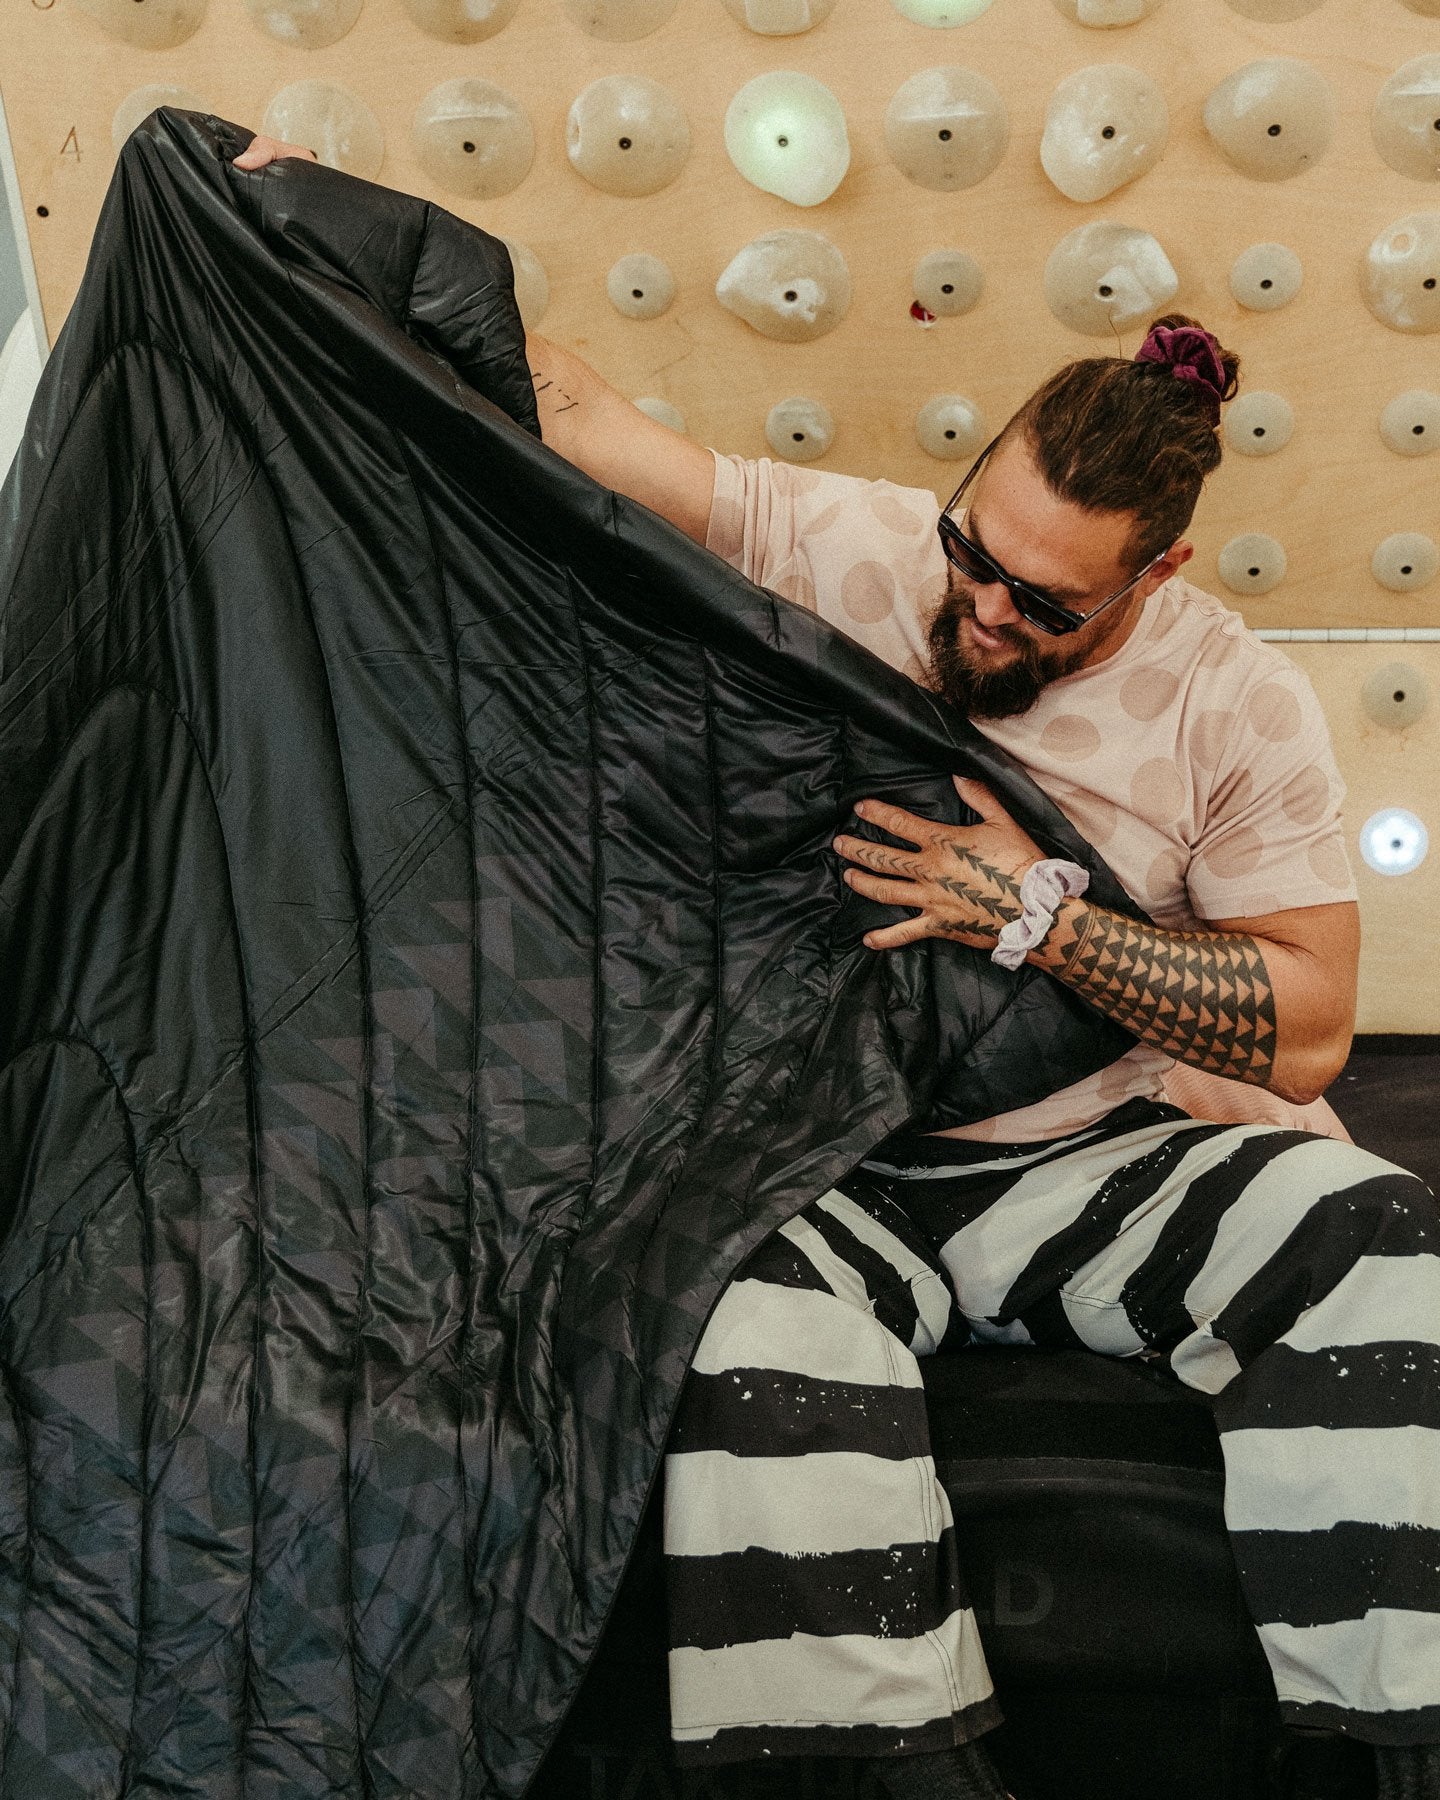 Jason Momoa holding up the Black Wolf Original Puffy Blanket from the Rumpl x So iLL x On The Roam, by Jason Momoa collaboration.